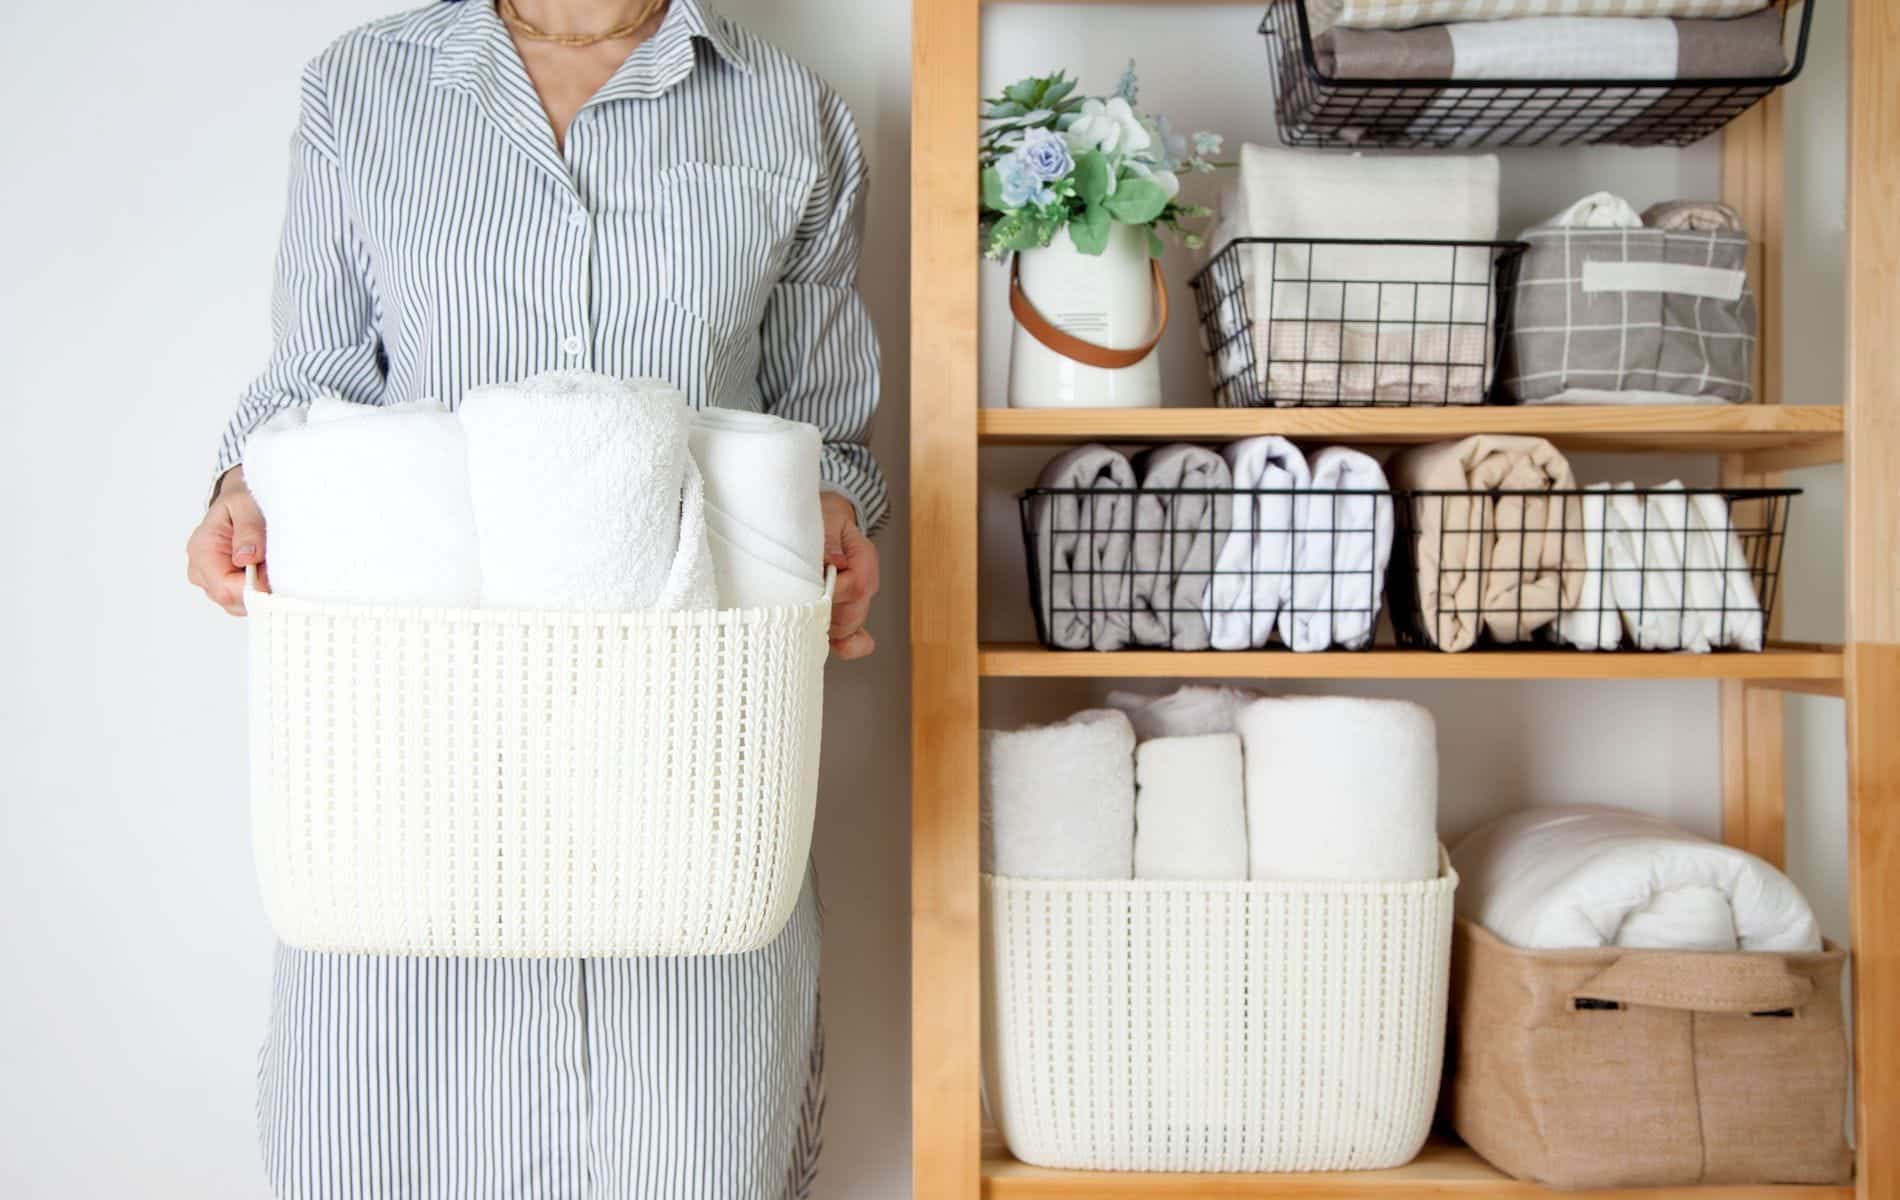 How to “Marie Kondo” Your Life